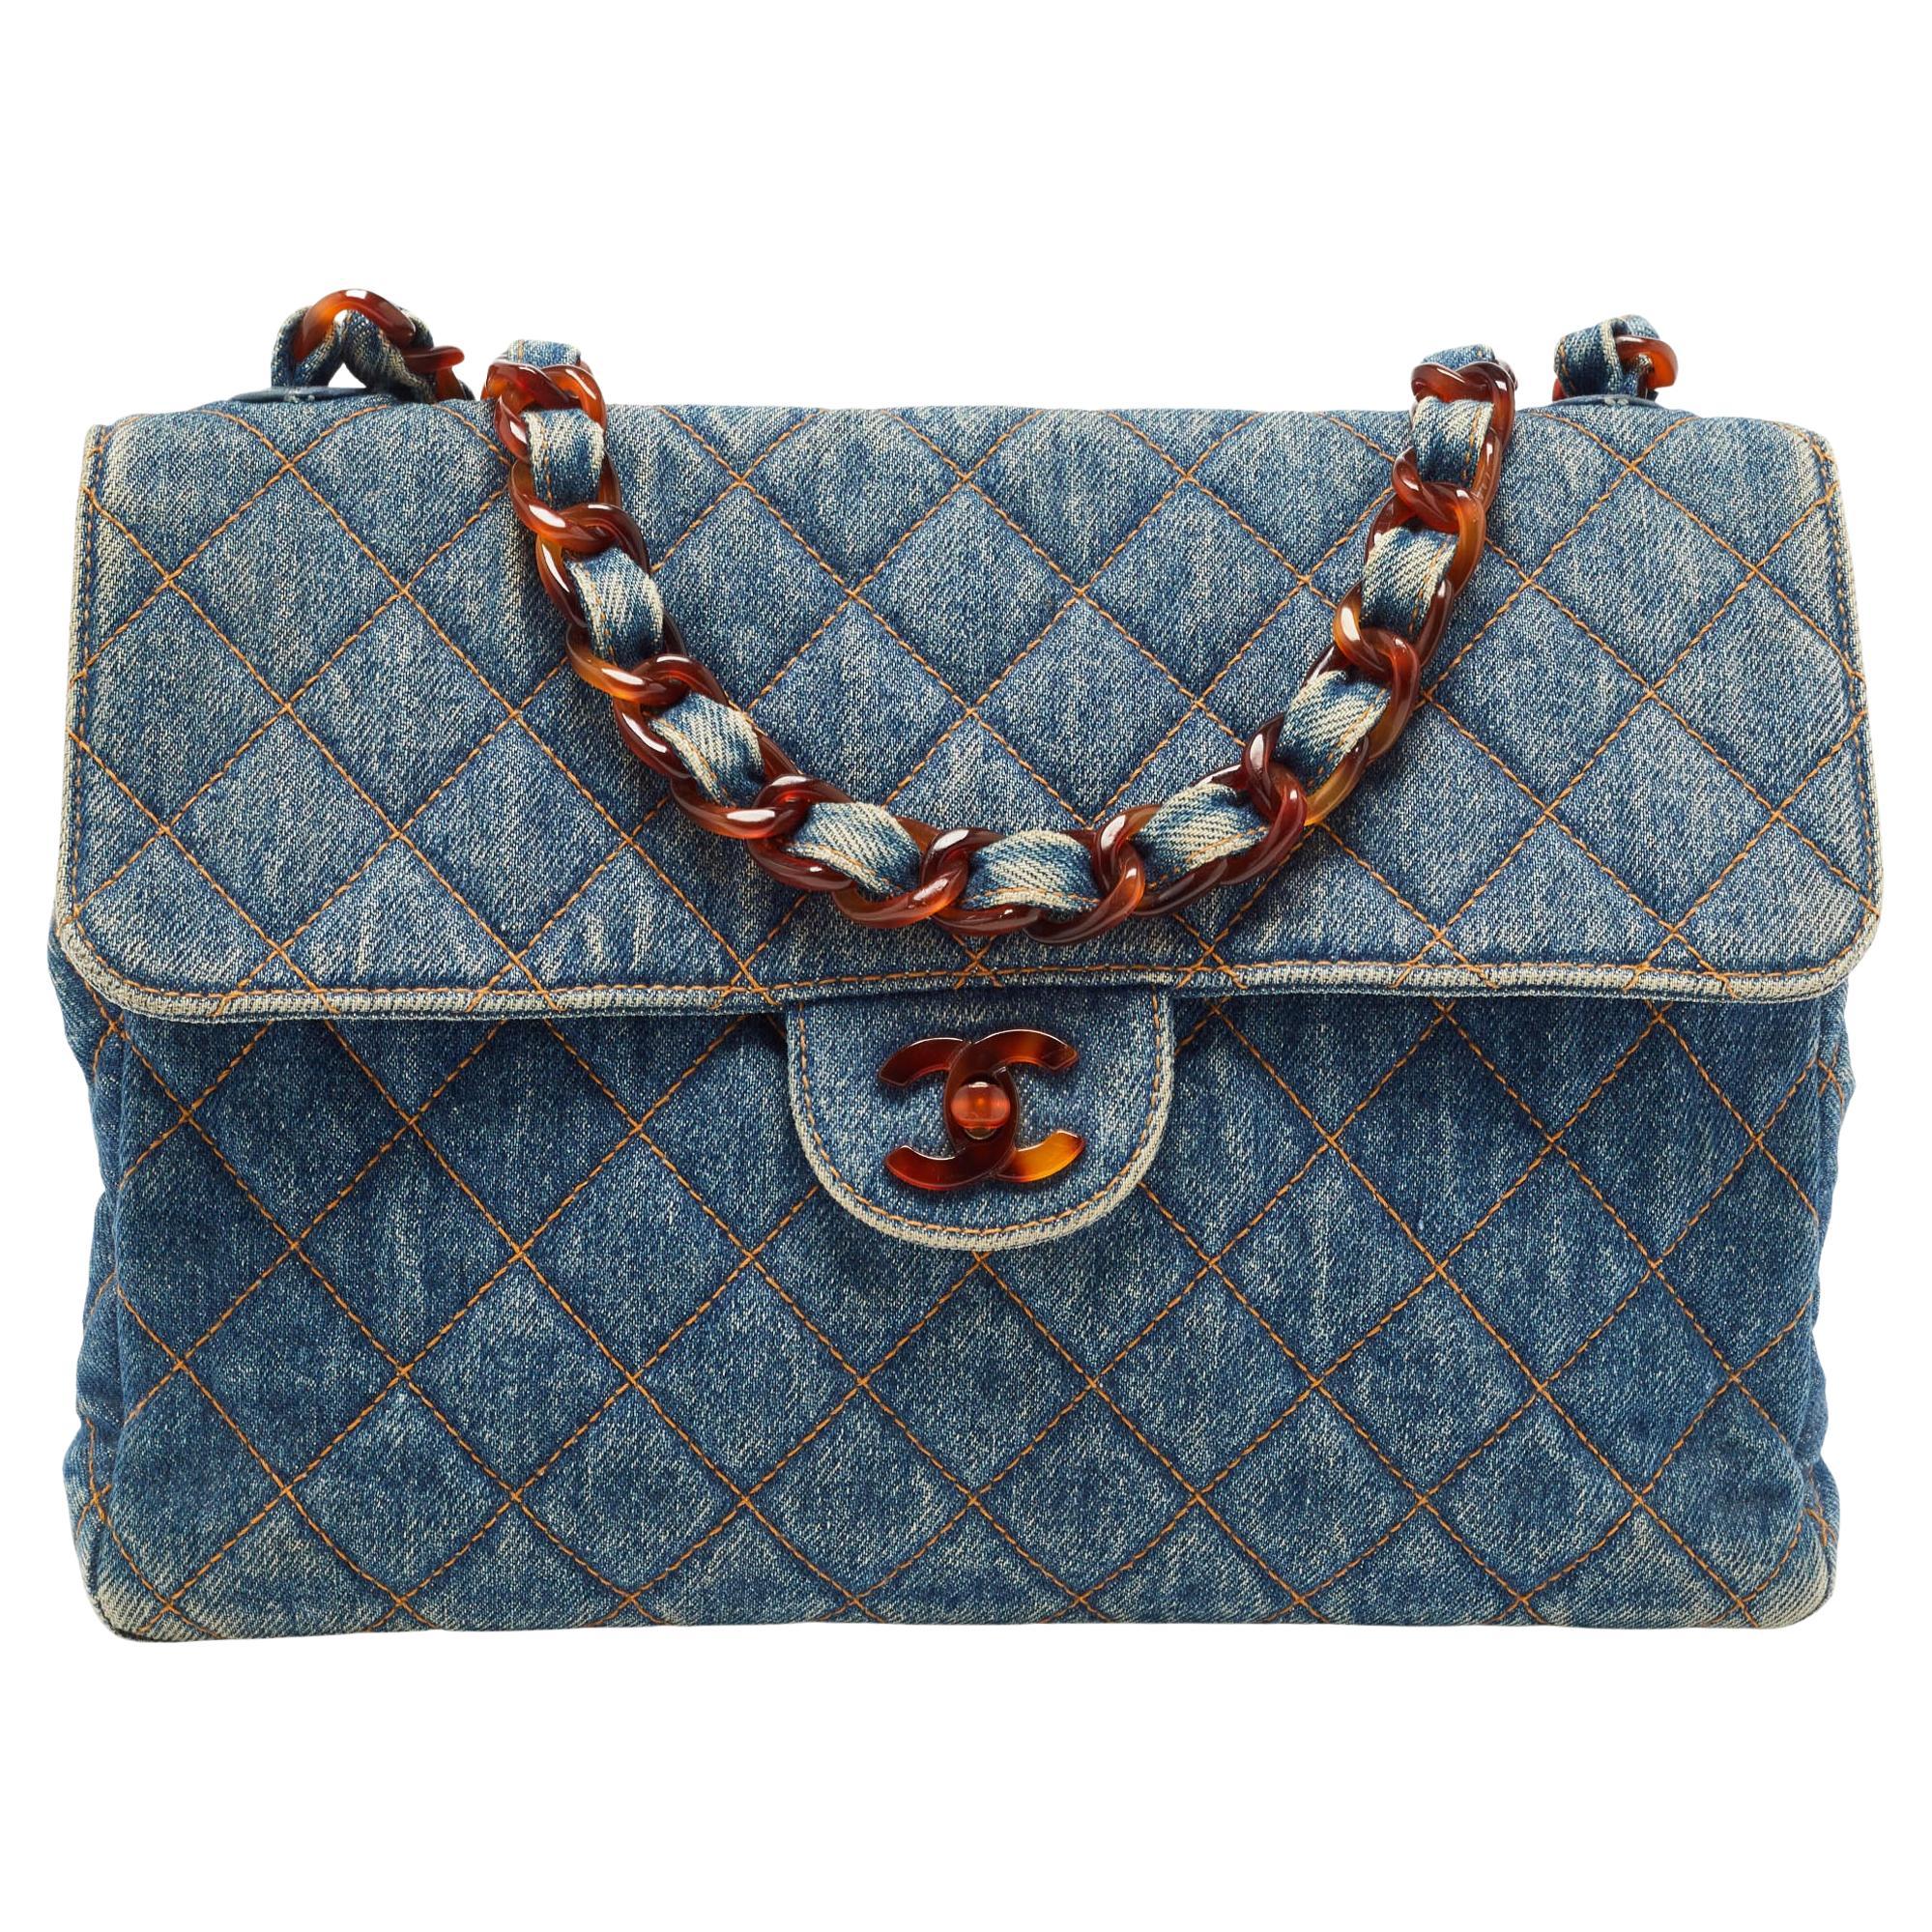 Chanel Blue Quilted Denim Classic Flap Bag